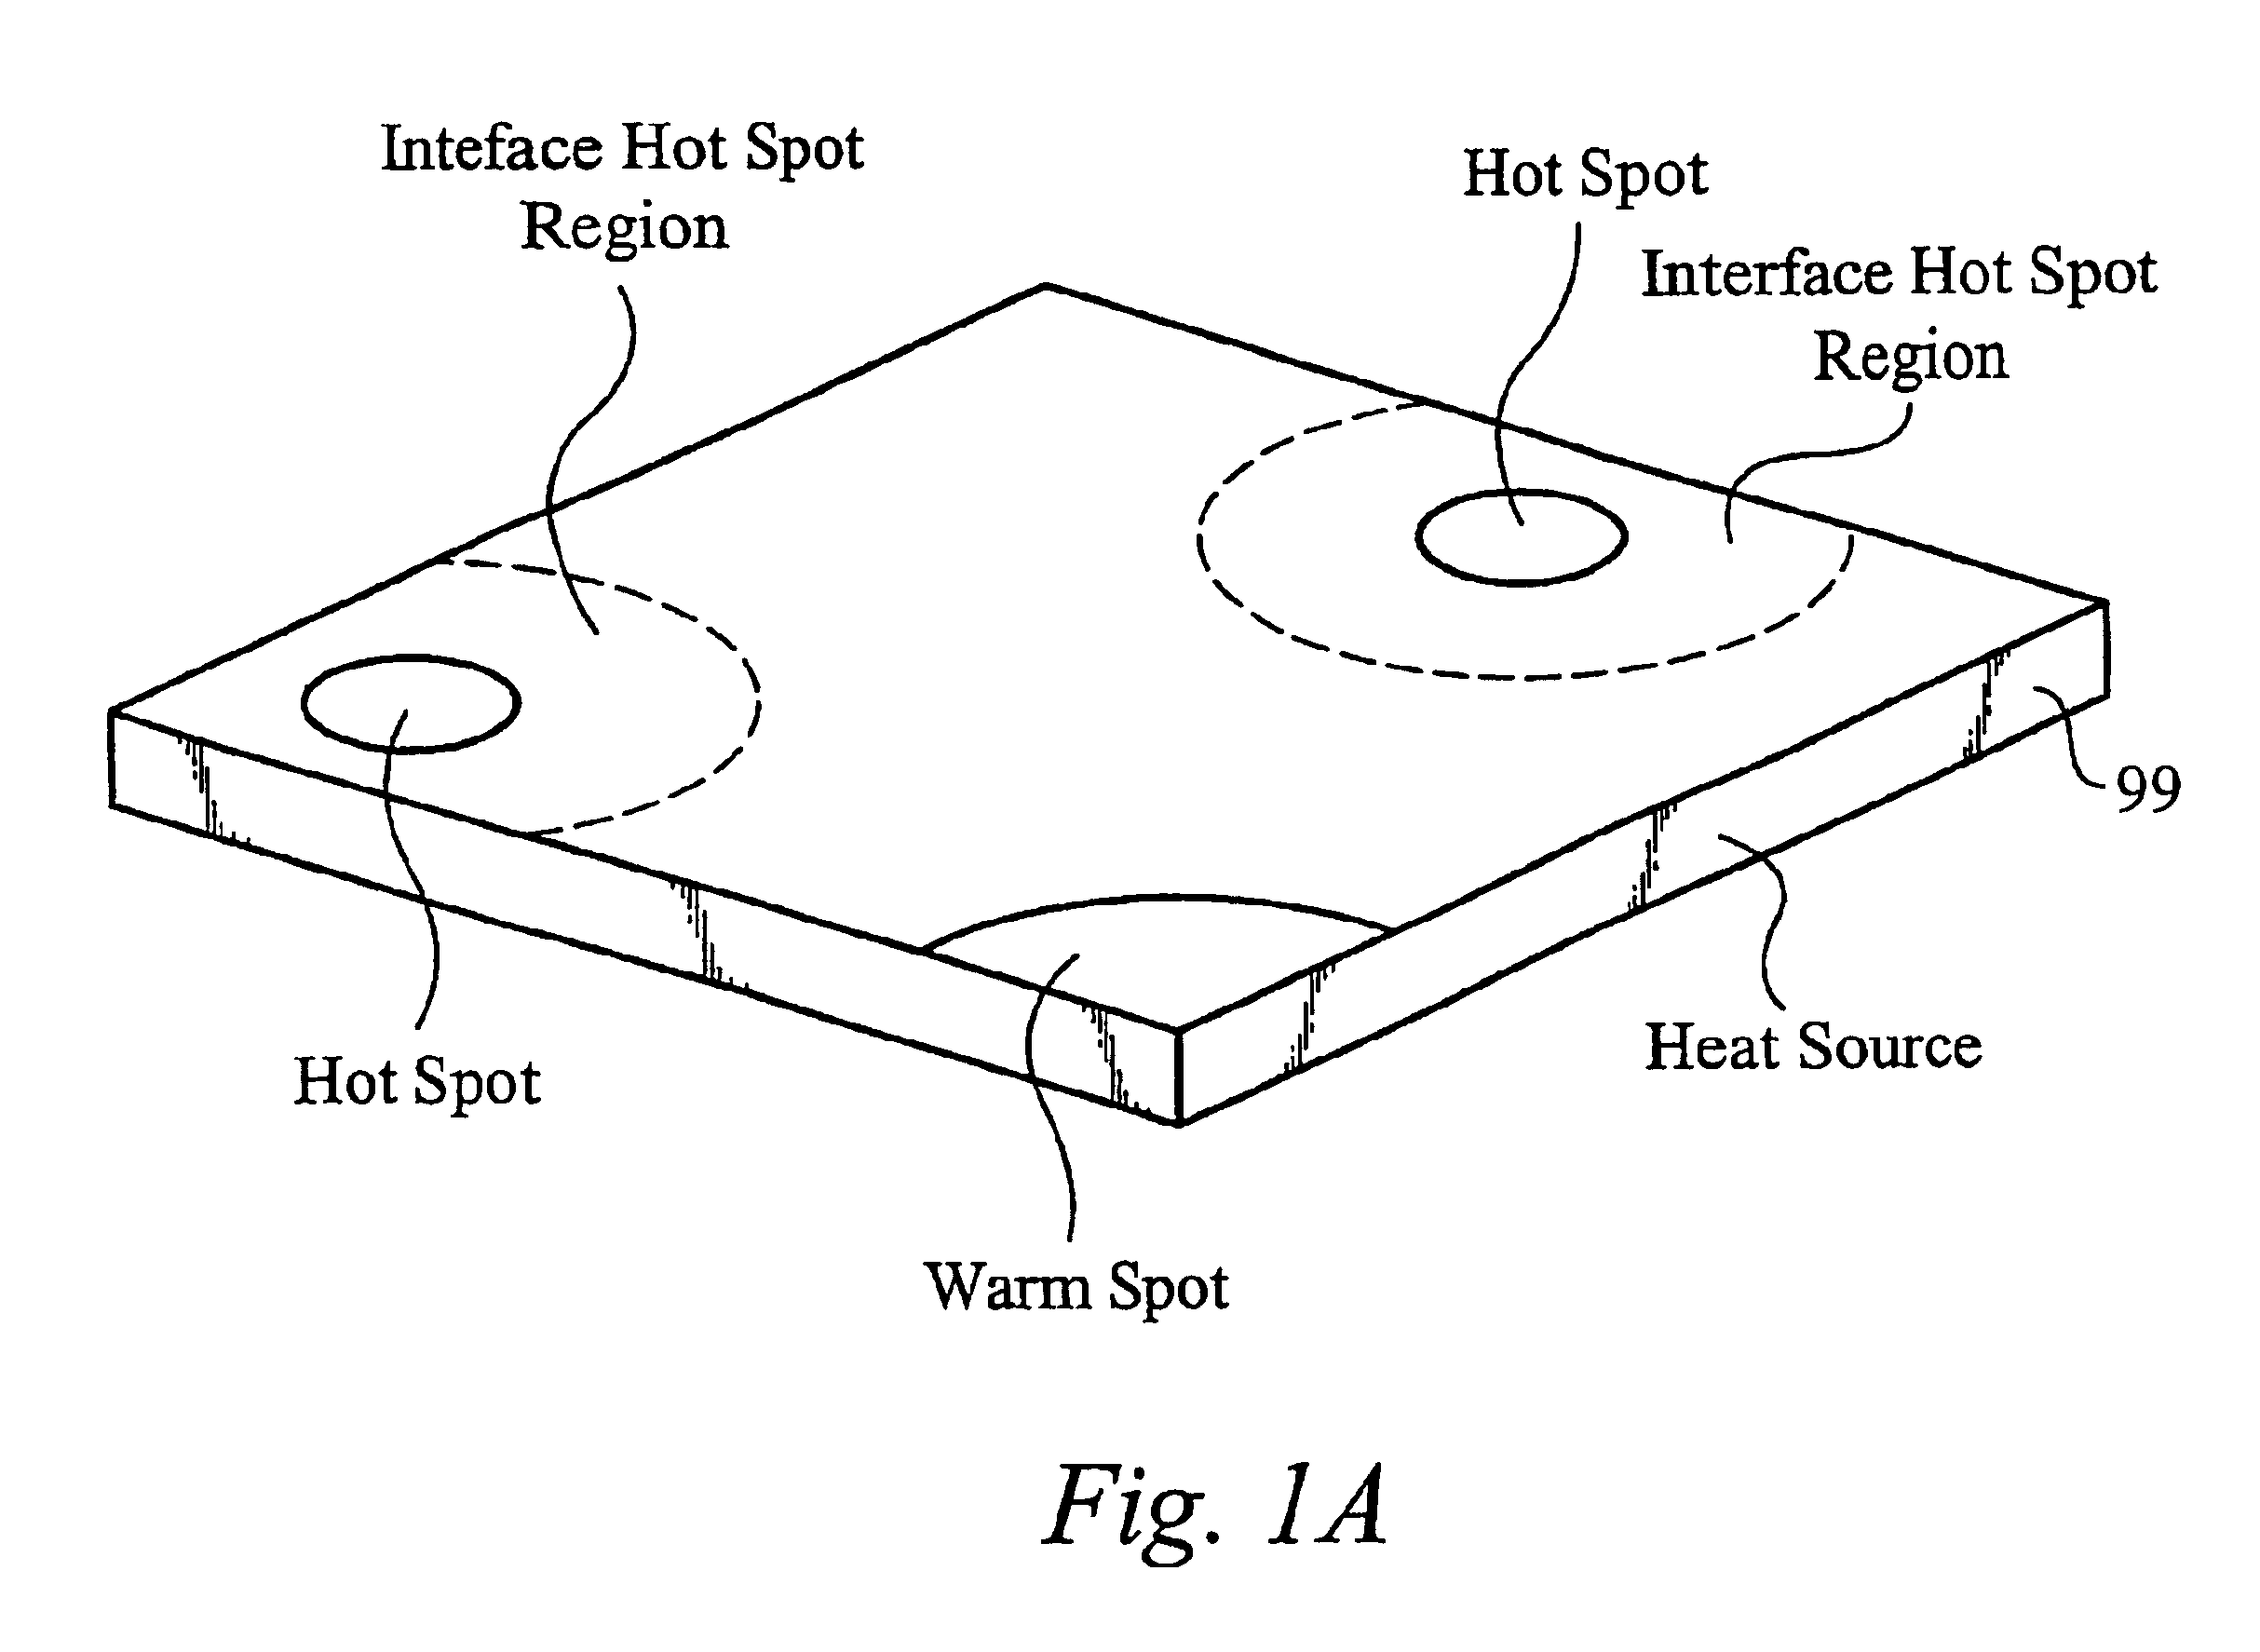 Method and apparatus for achieving temperature uniformity and hot spot cooling in a heat producing device